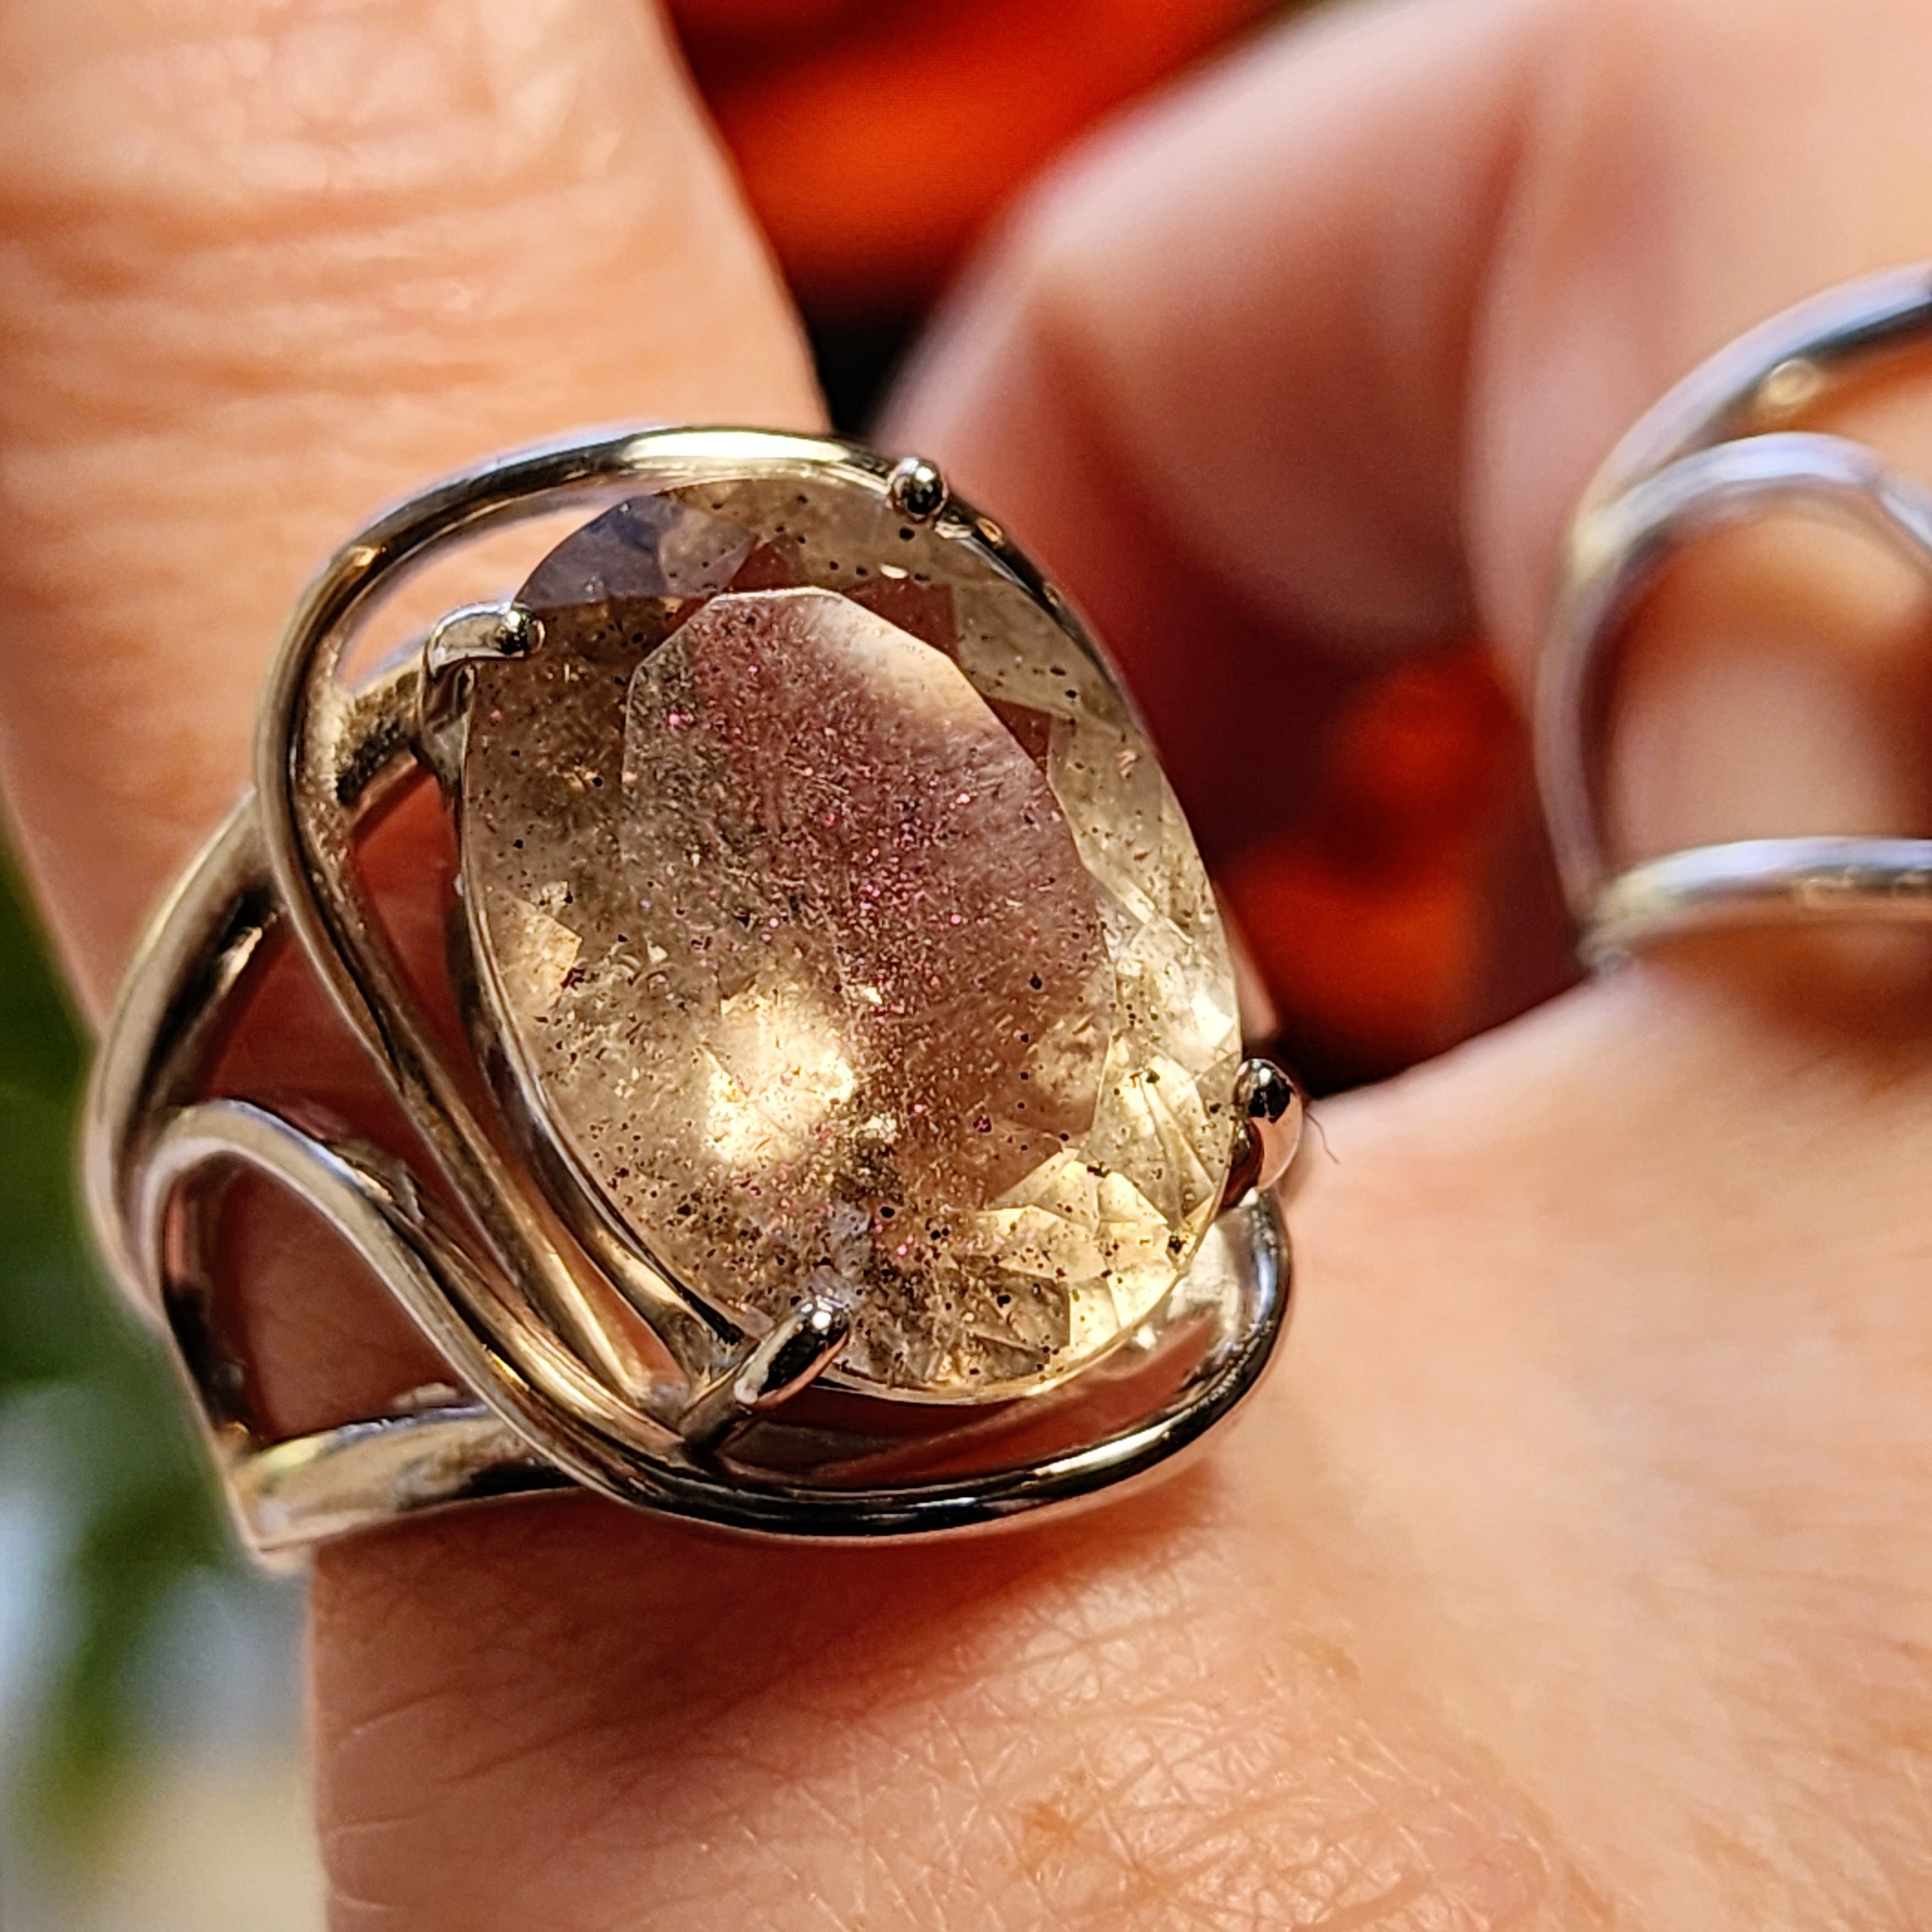 Pink Fire Covellite in Quartz Finger Cuff Adjustable Ring .925 Silver for Manifesting, Enhanced Flow of Energy and Spiritual Transformation